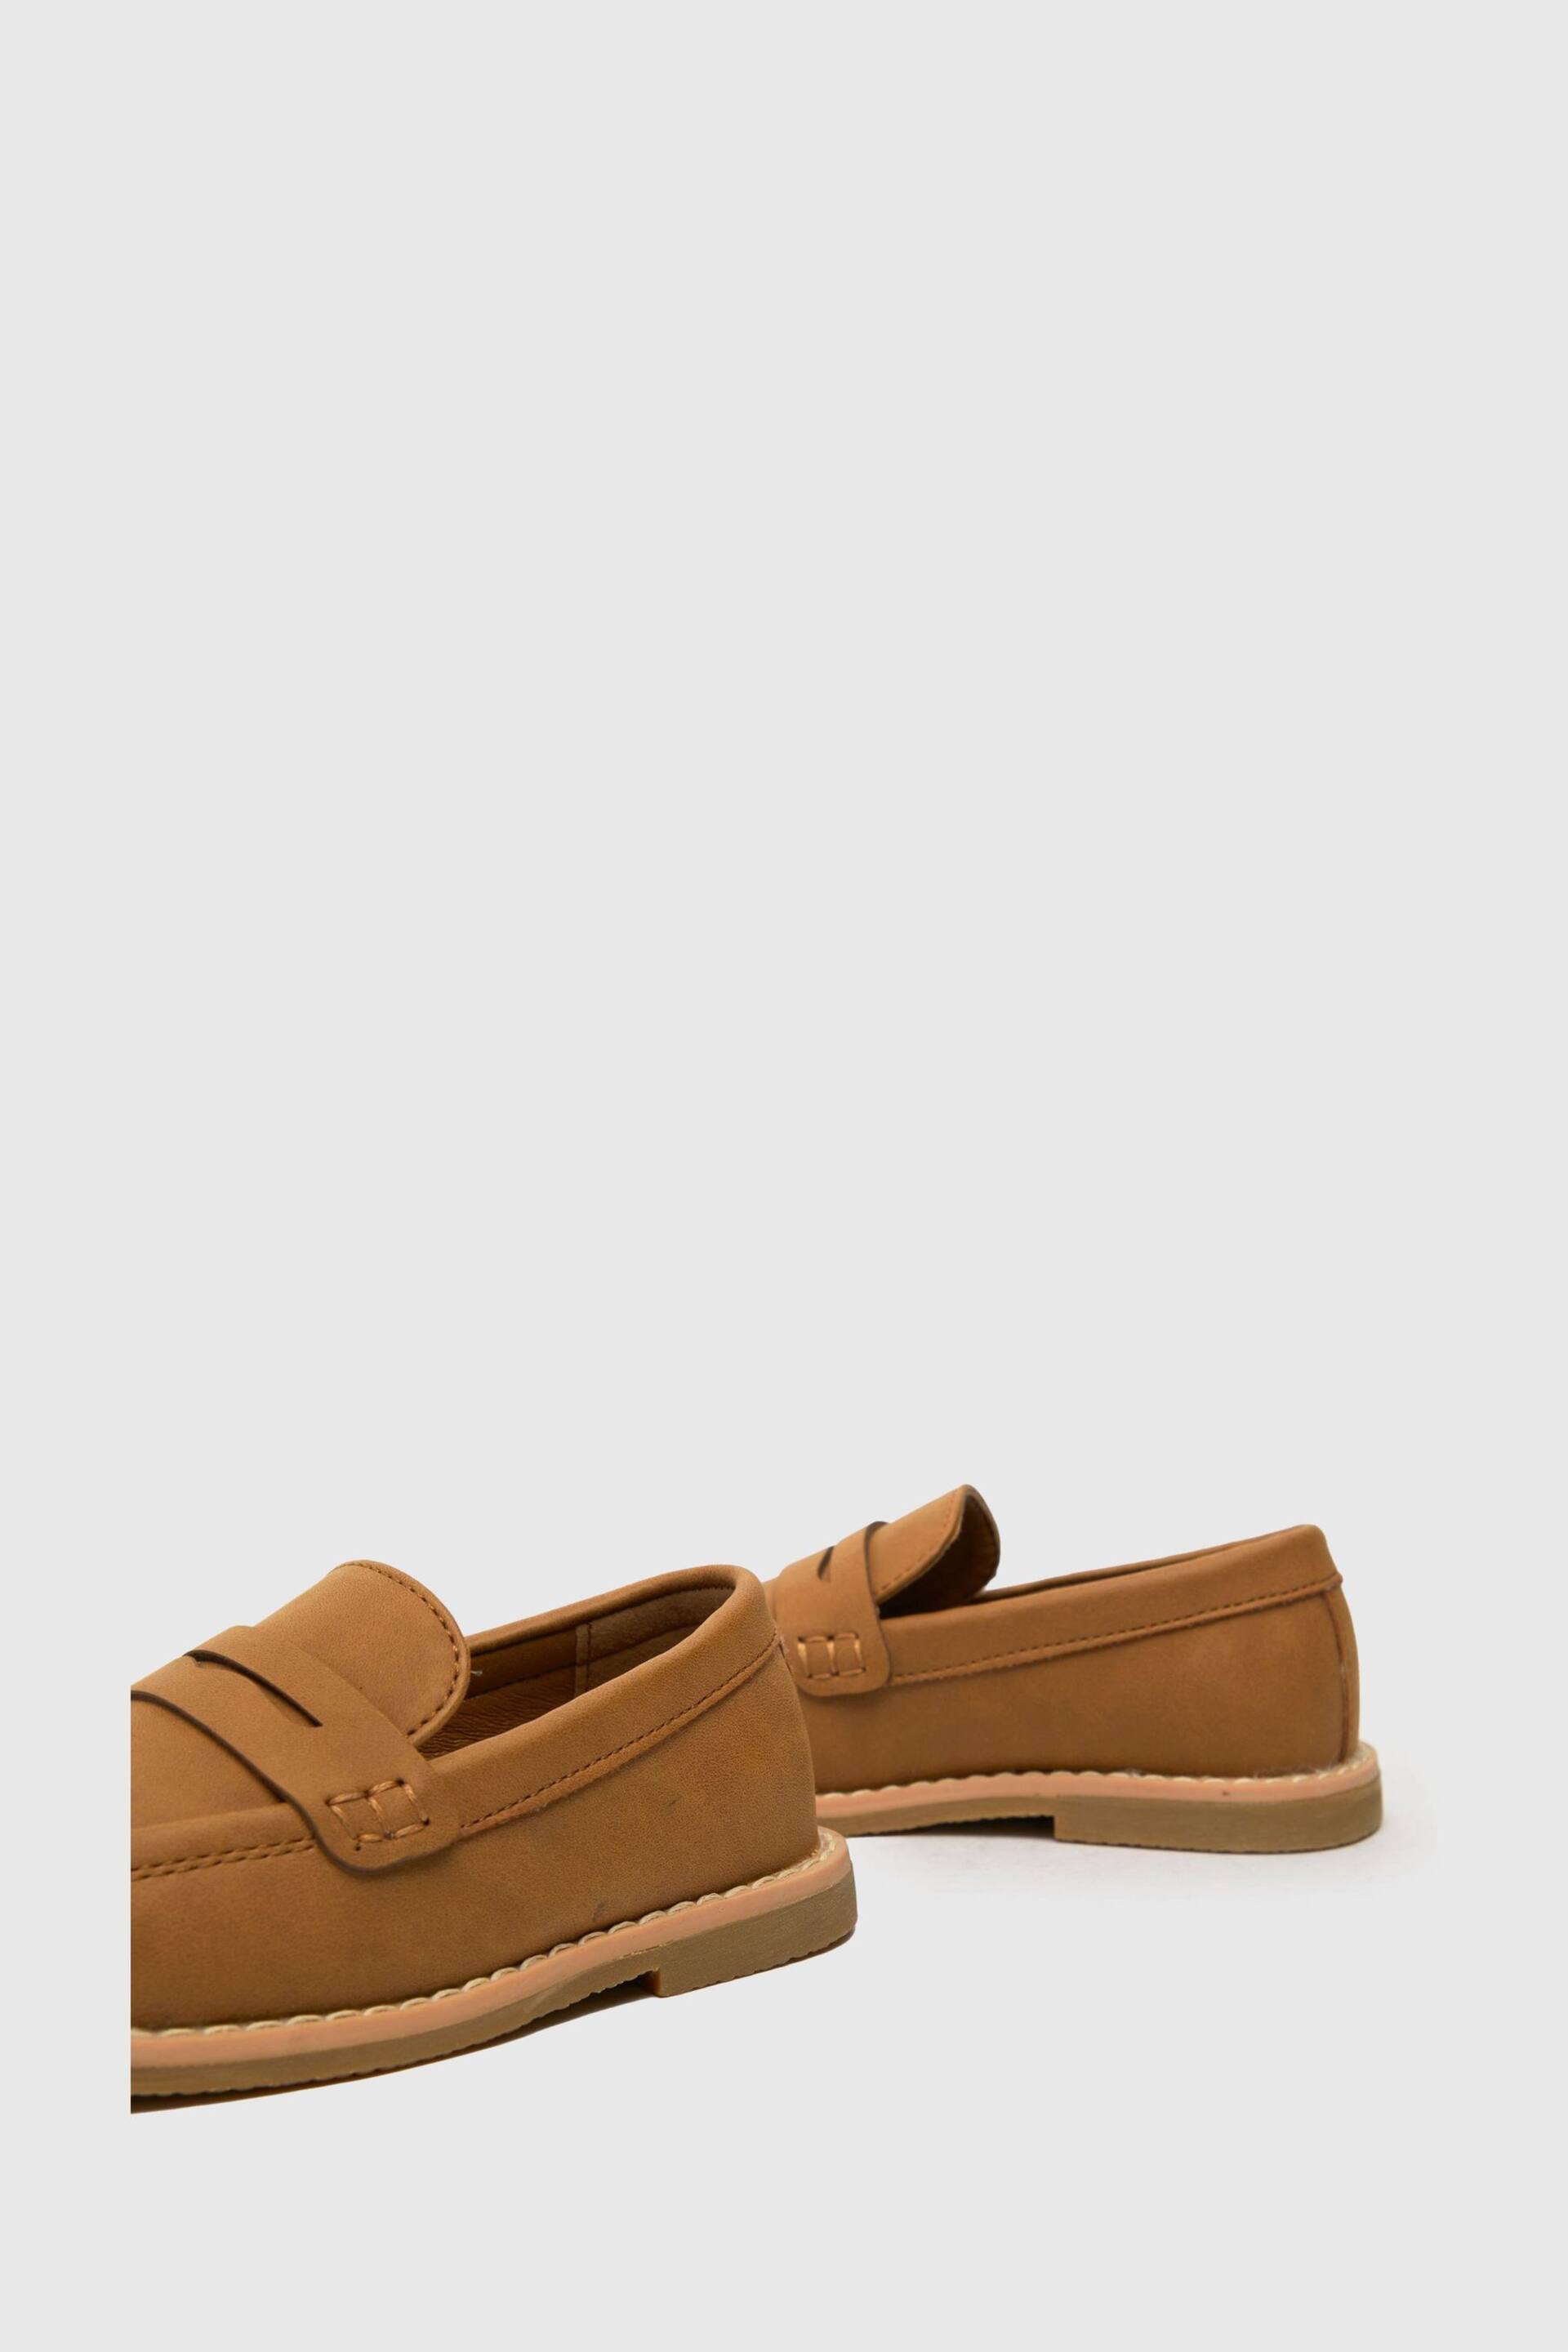 Schuh Brown Limit Loafers - Image 4 of 4